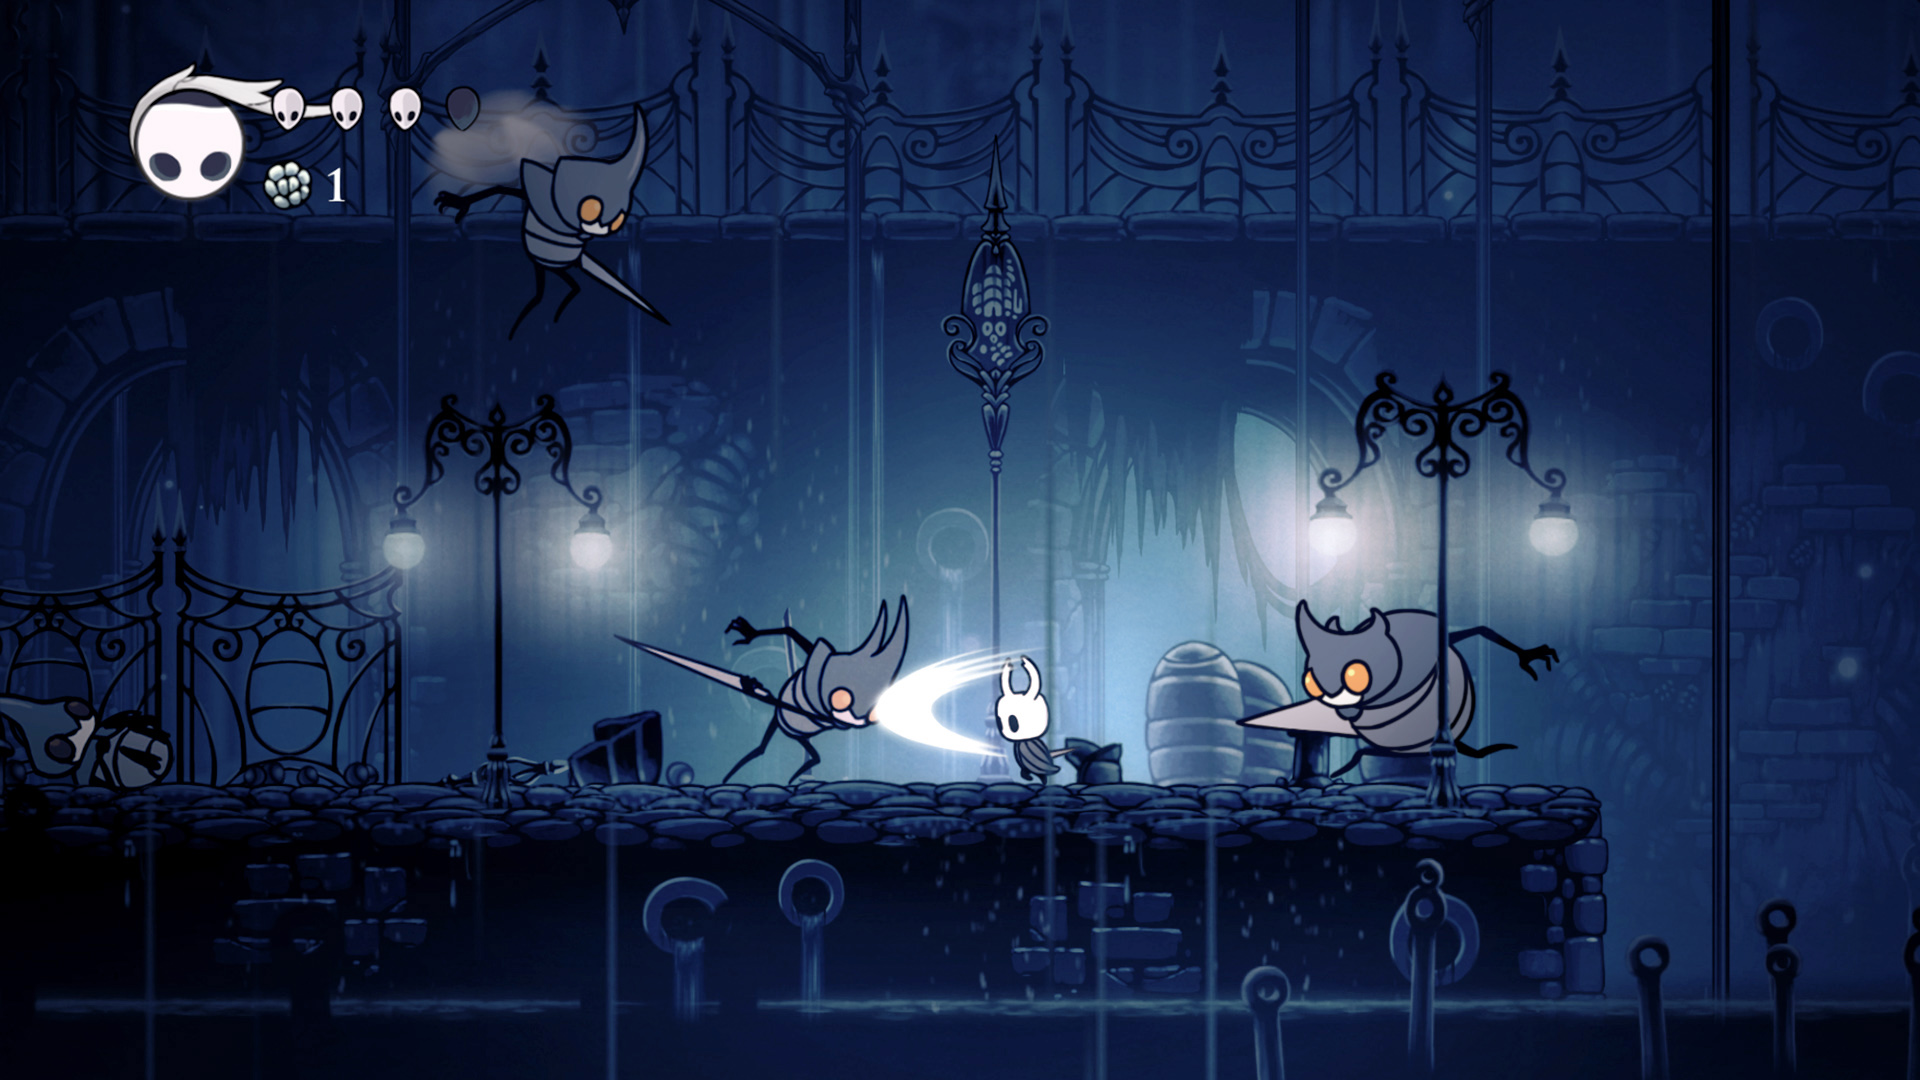 Hollow Knight for PlayStation 4 - Bitcoin & Lightning accepted